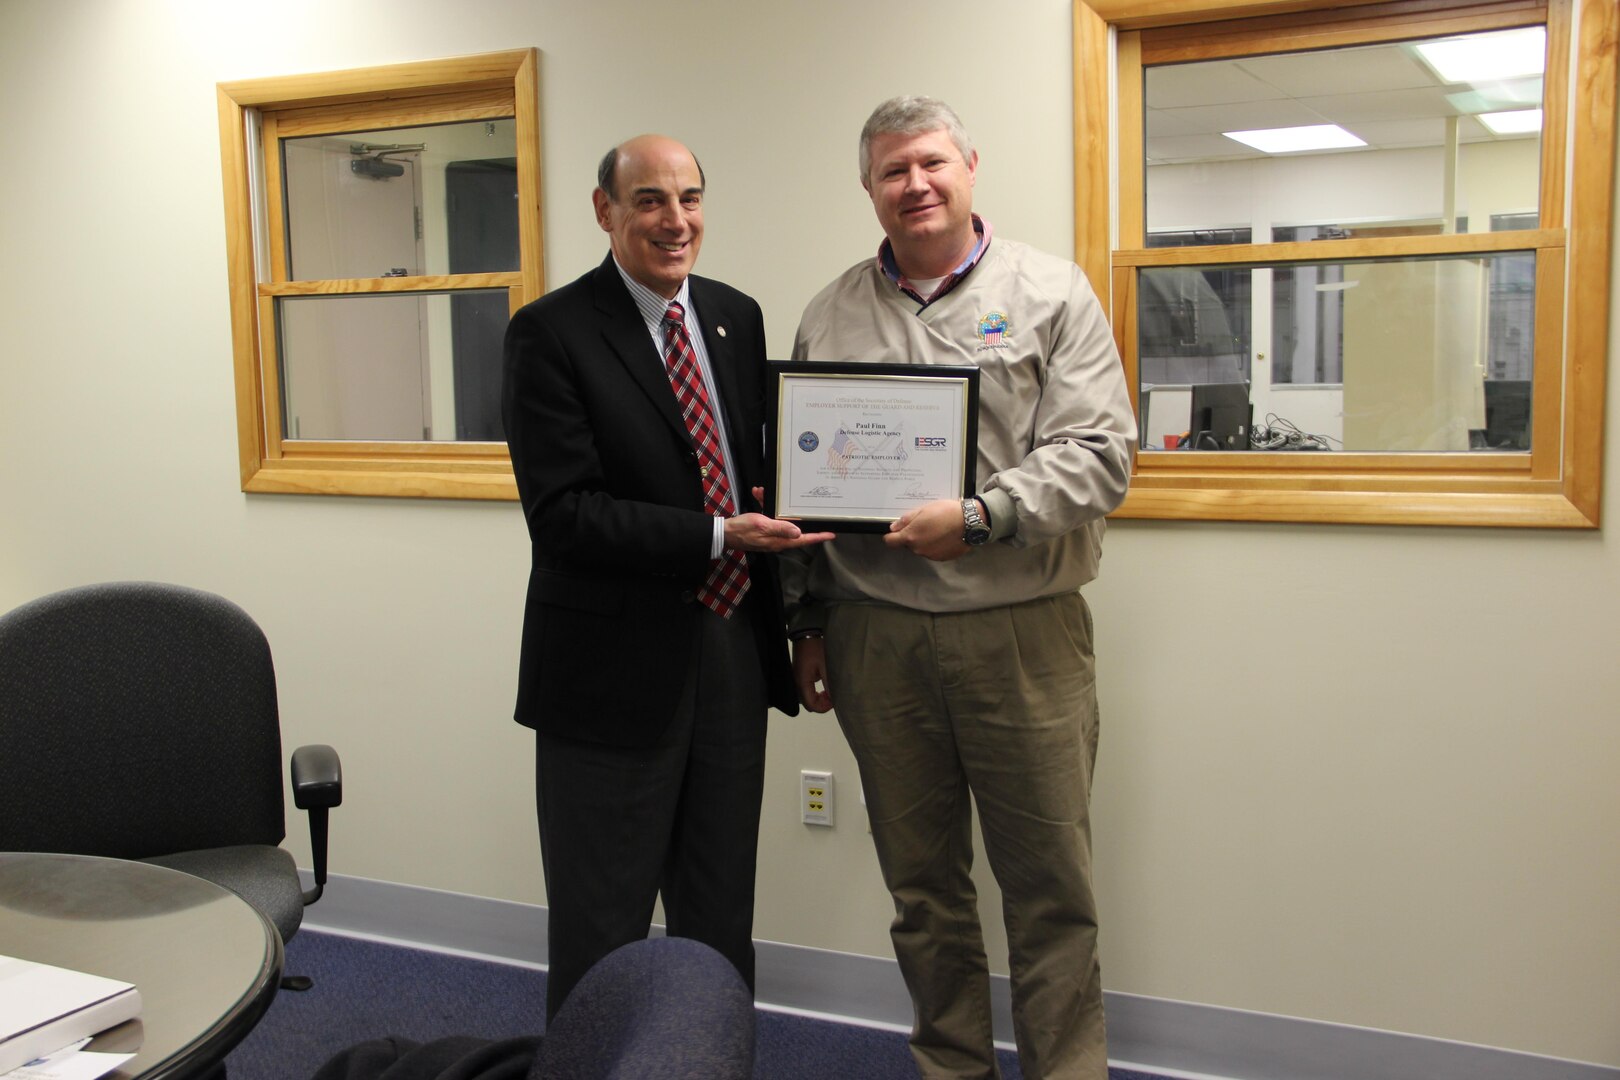 Paul Finn, Eastern Distribution Center operations manager at DLA Distribution Susquehanna, Pa., is presented the Employer Support of the Guard and Reserve Patriotic Employer award by James Astor, chair of South Central Pennsylvania ESGR.